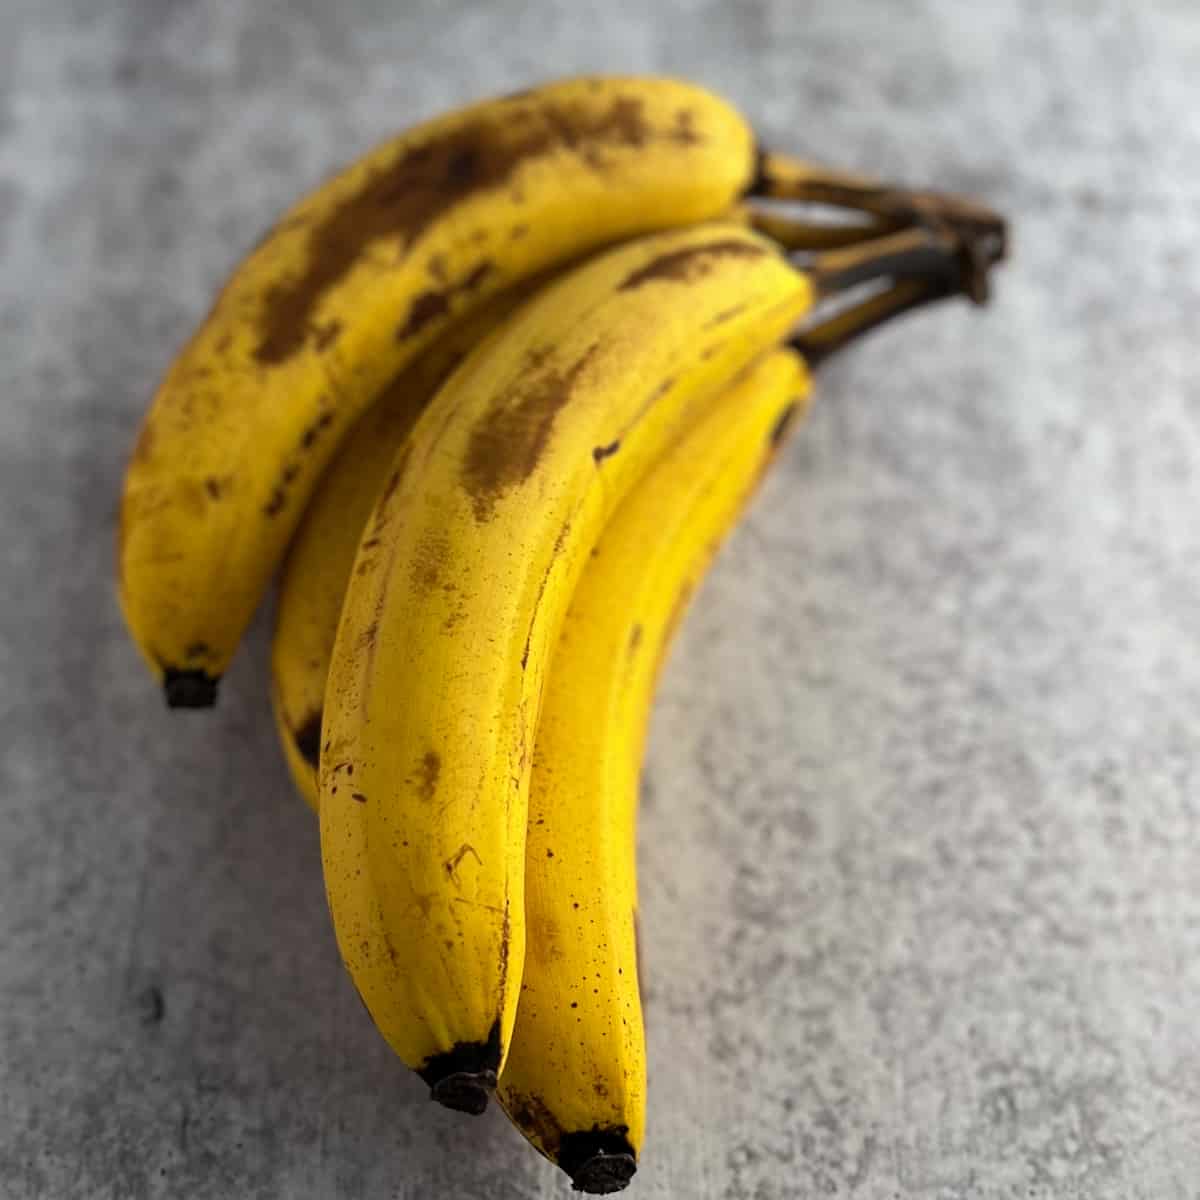 top view of ripe bananas on a grey surface